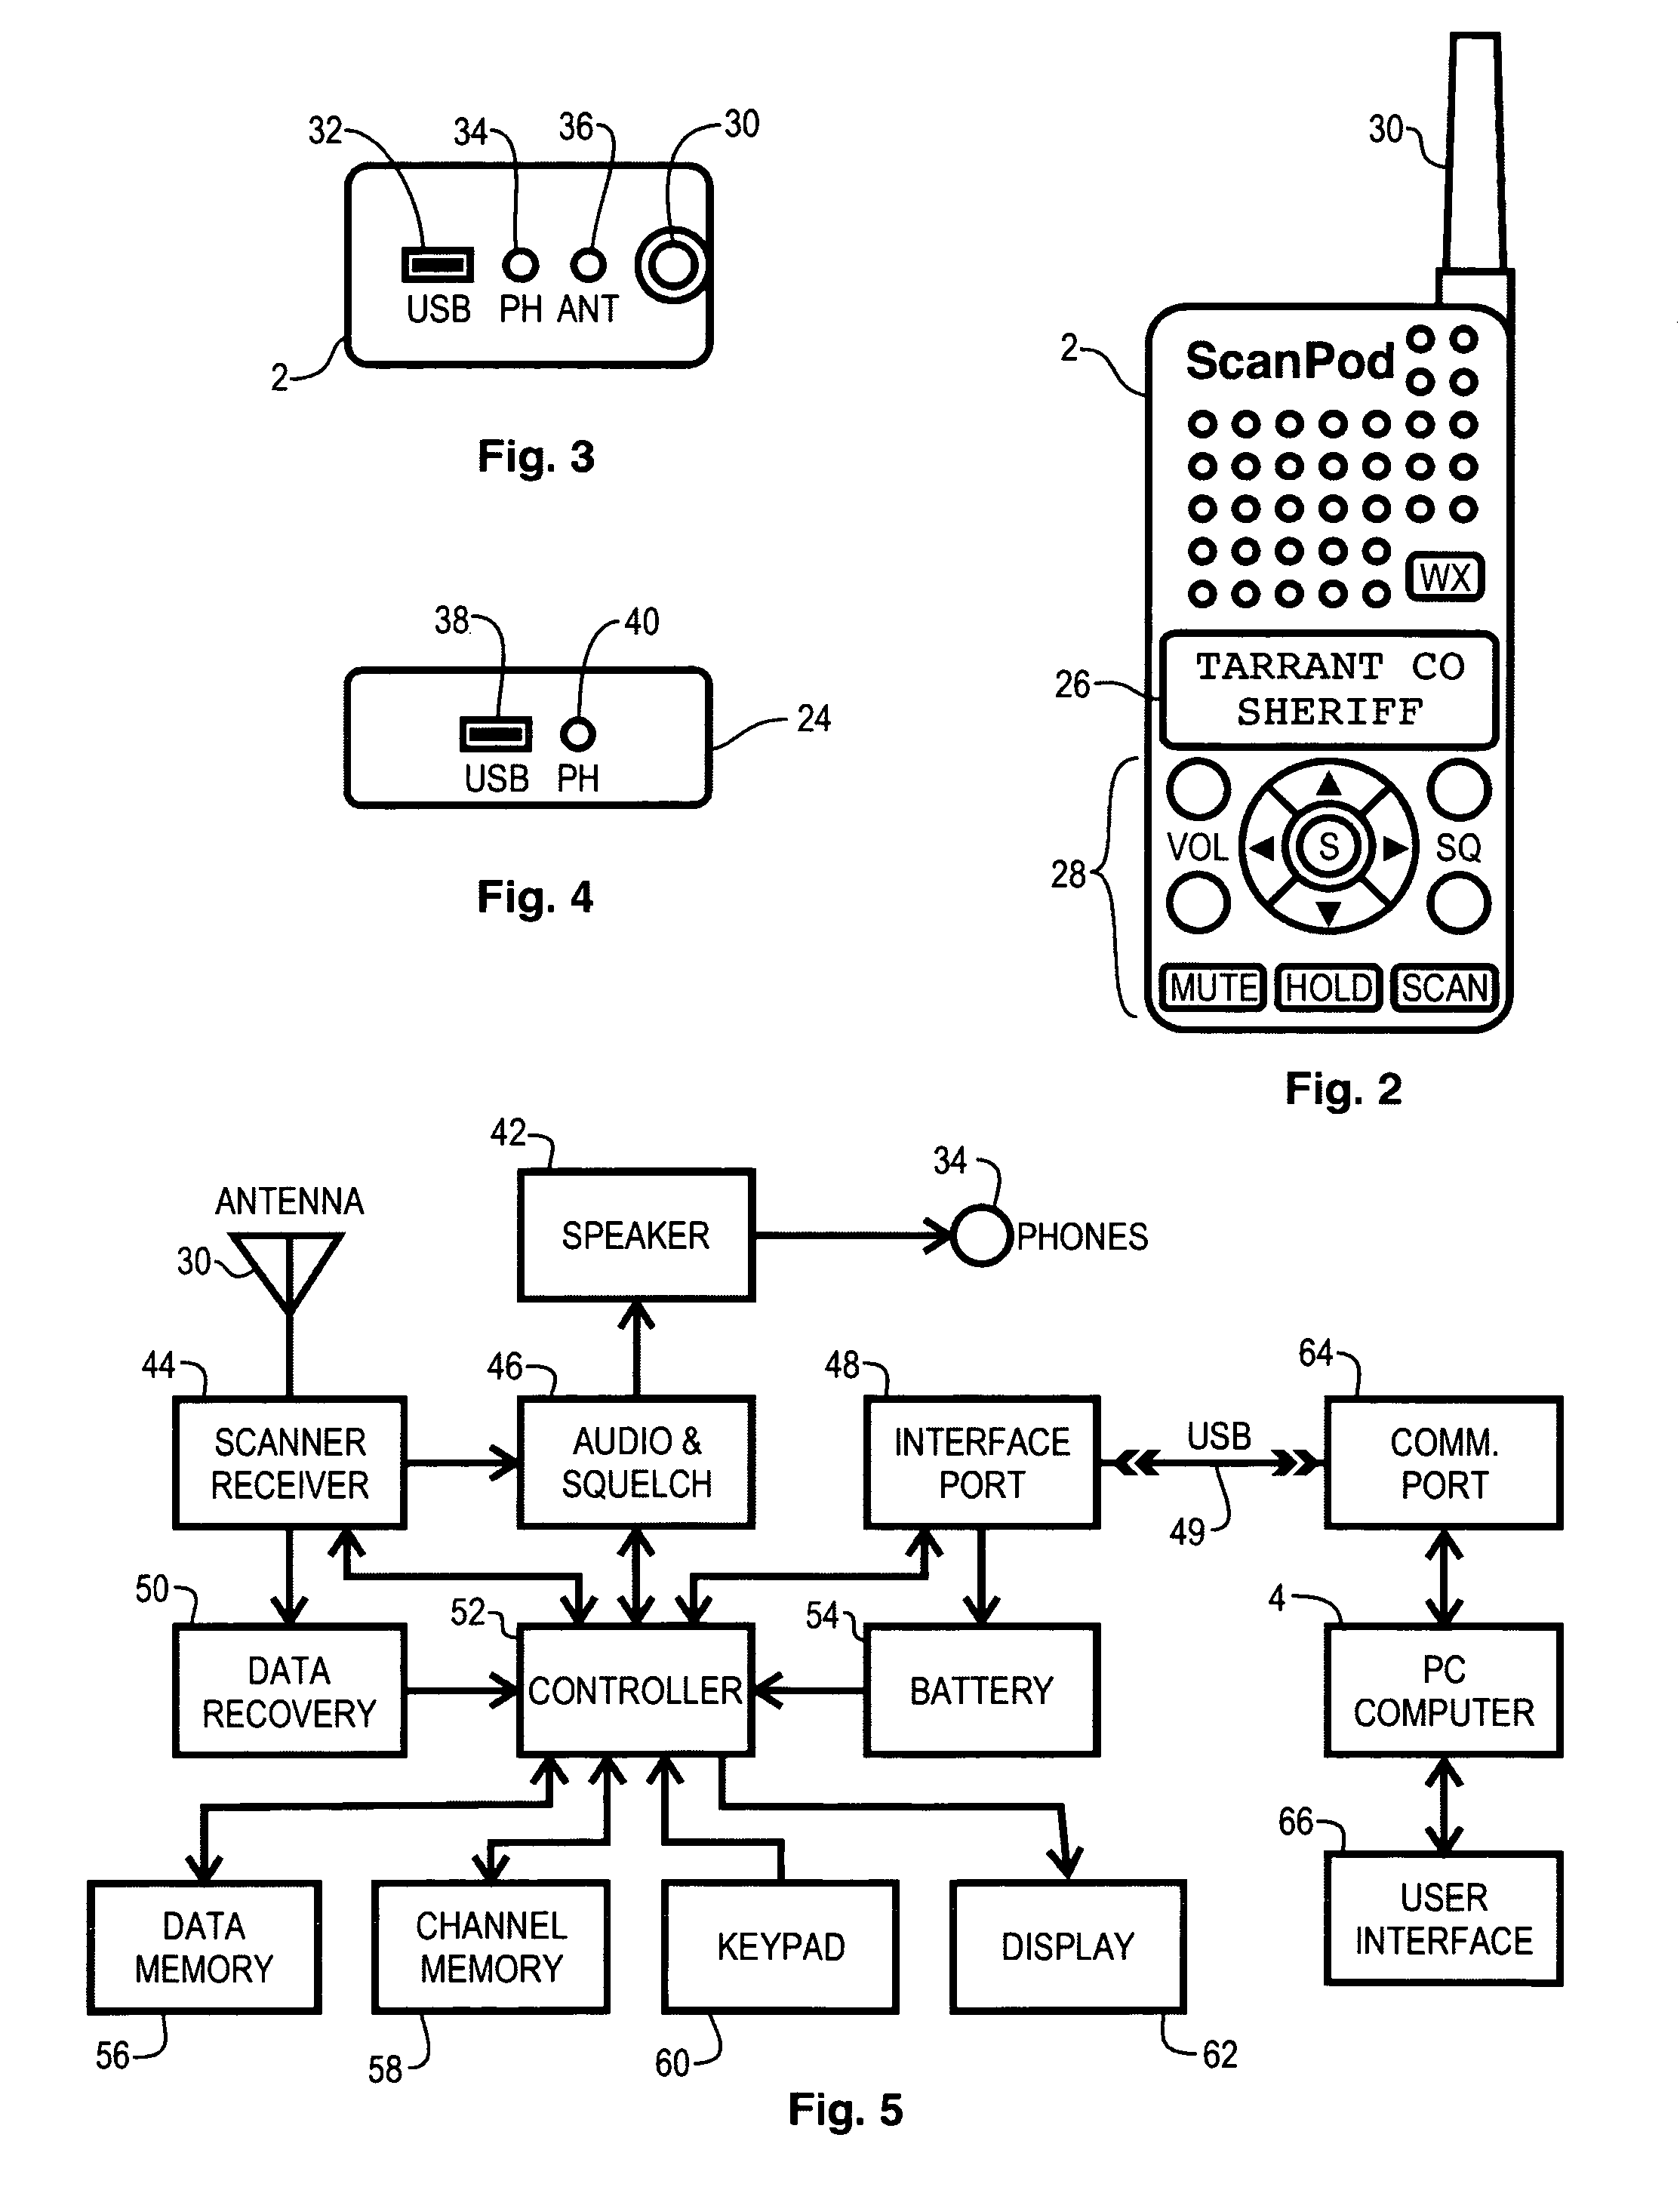 Radio scanner programmed from frequency database and method